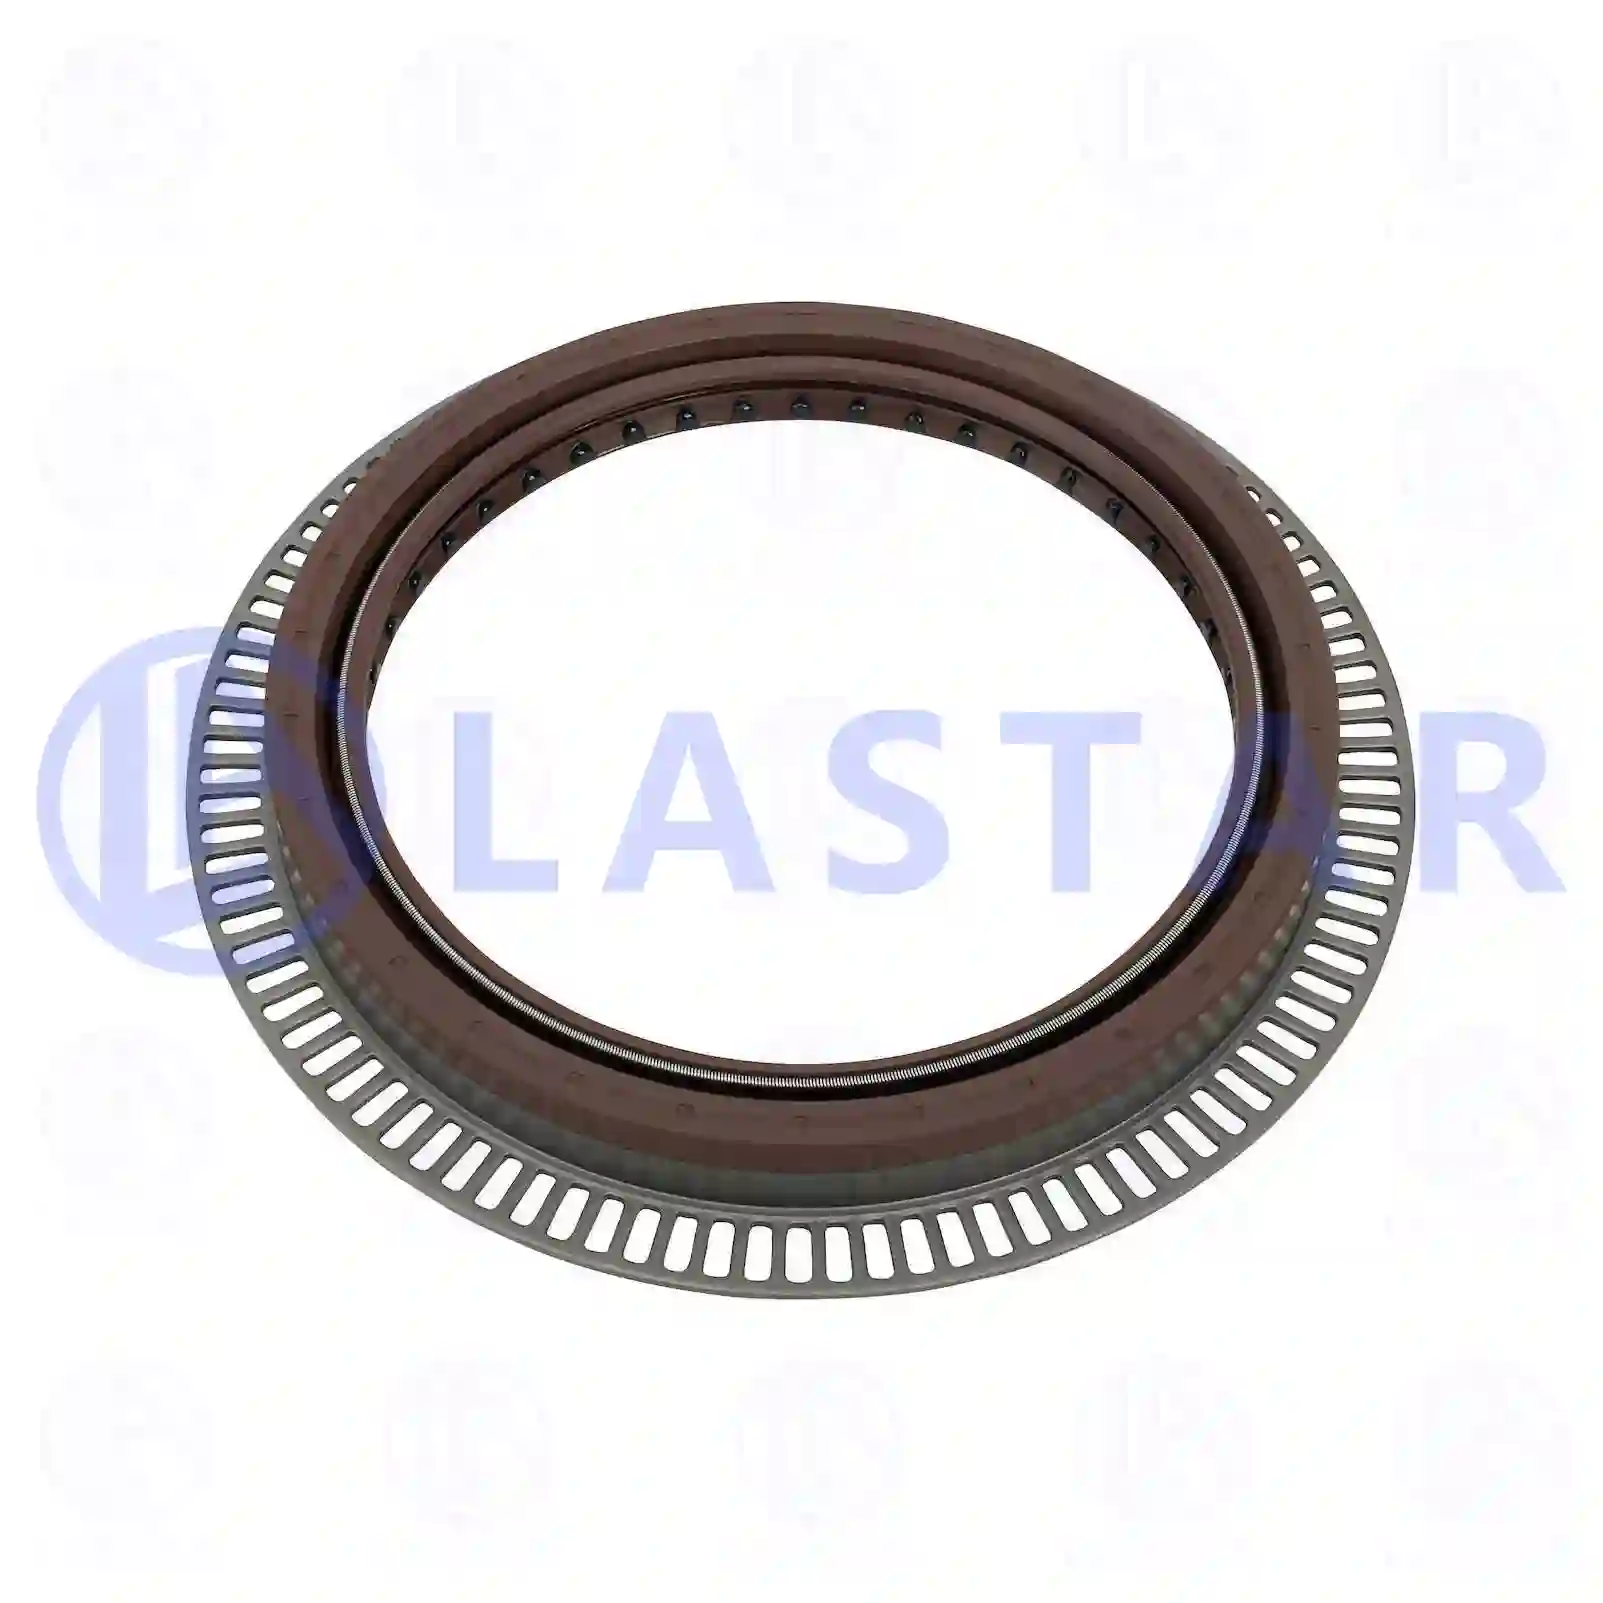 Oil seal, with ABS ring, 77726192, 0209970547, , , , , ||  77726192 Lastar Spare Part | Truck Spare Parts, Auotomotive Spare Parts Oil seal, with ABS ring, 77726192, 0209970547, , , , , ||  77726192 Lastar Spare Part | Truck Spare Parts, Auotomotive Spare Parts